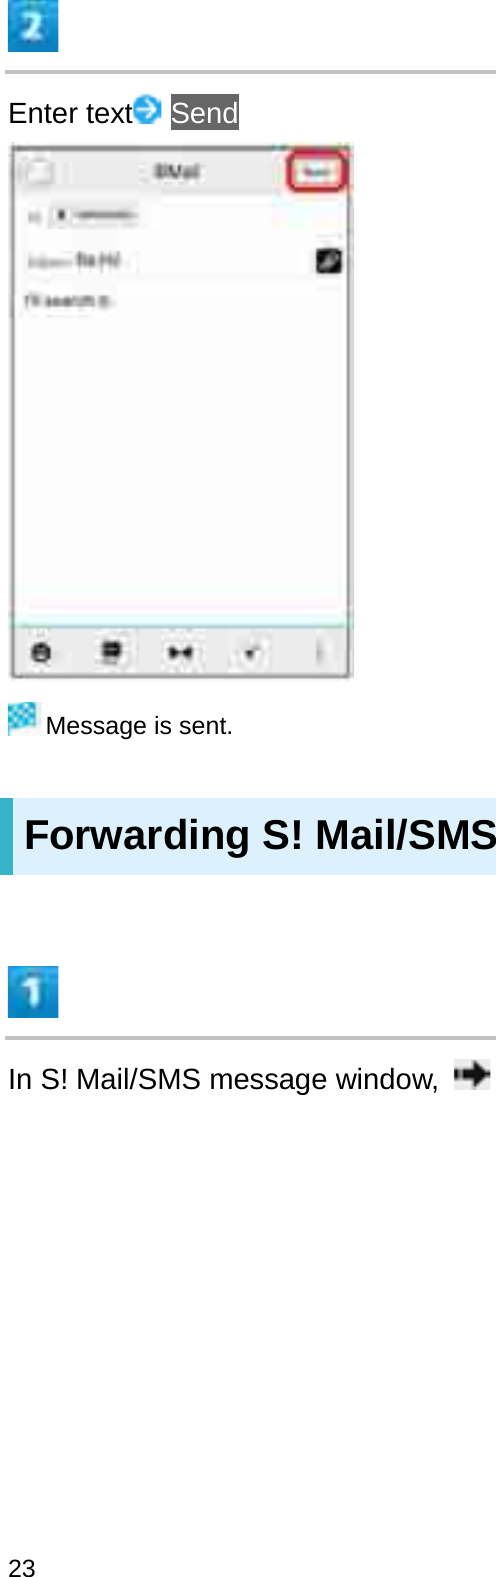 Enter text SendMessage is sent.Forwarding S! Mail/SMSIn S! Mail/SMS message window, 23